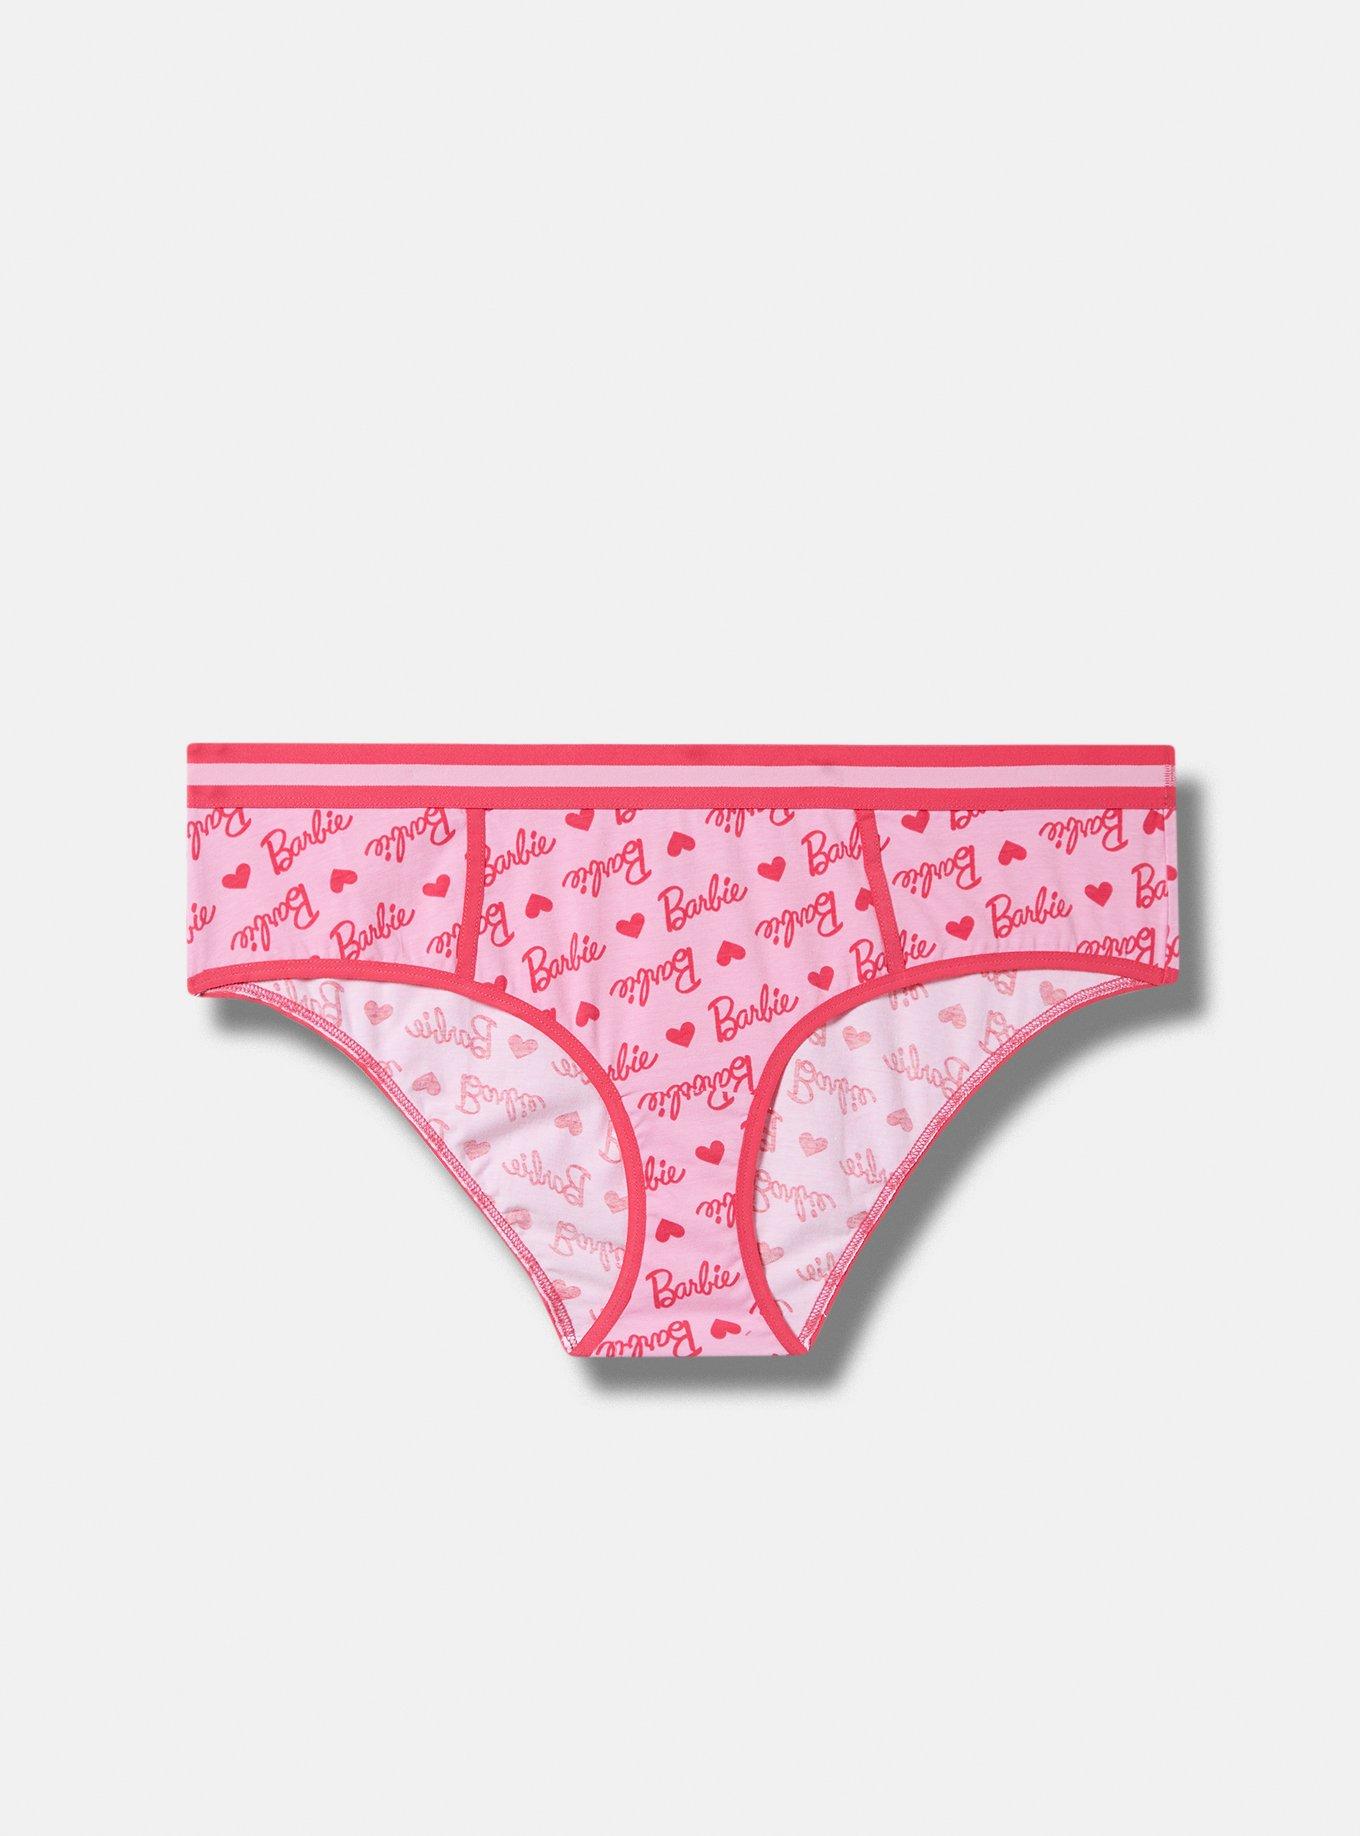 Victoria's Secret & PINK Pantie SIZE CHART (INFORMATIONAL PURPOSES ONLY!!)  